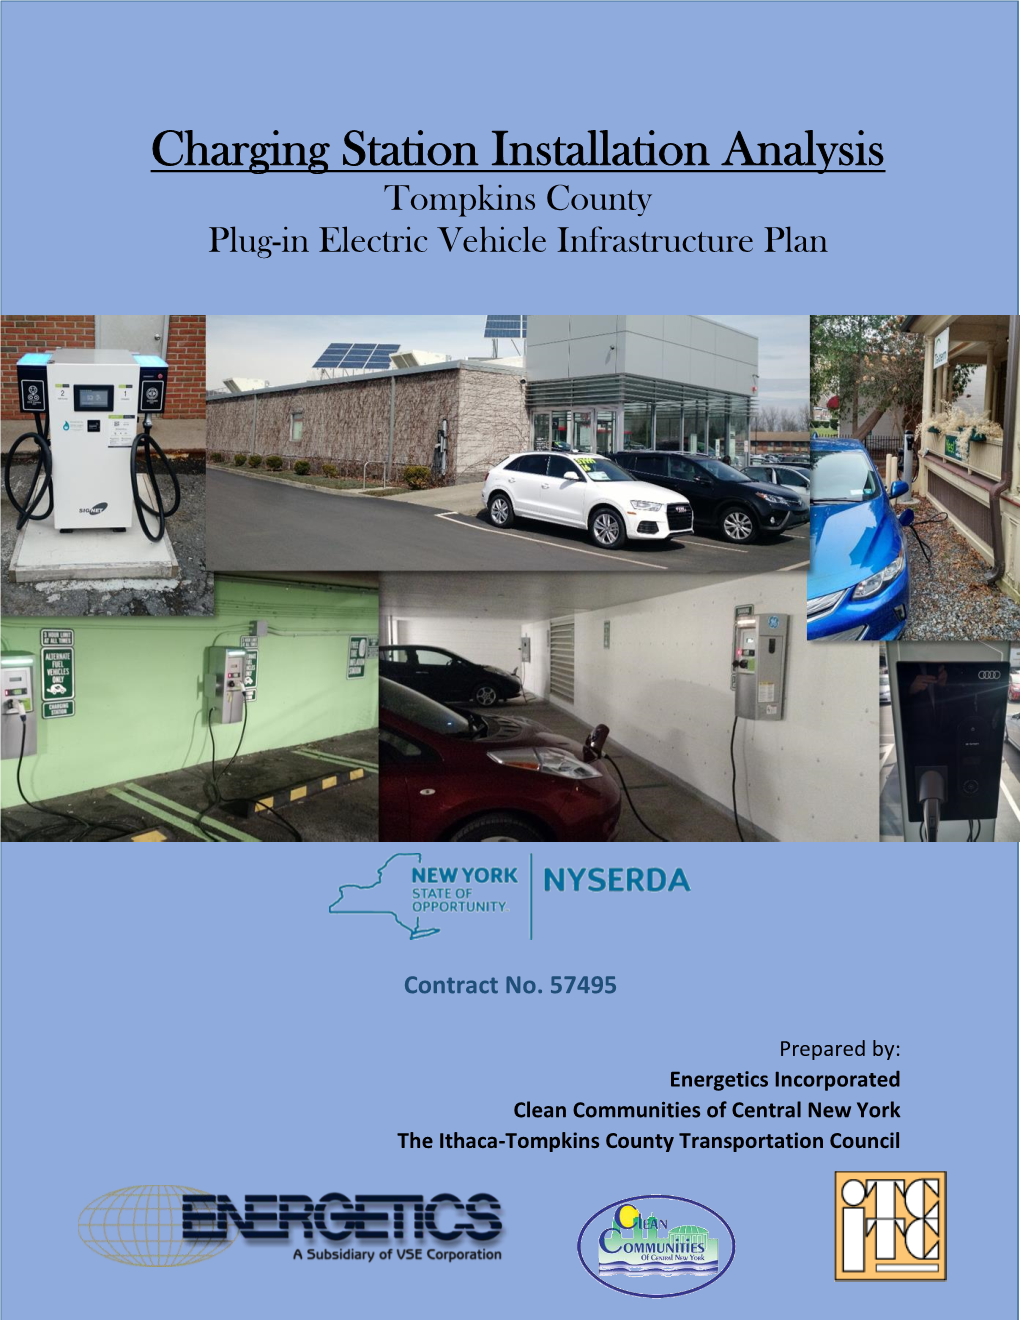 Charging Station Installation Analysis Tompkins County Plug-In Electric Vehicle Infrastructure Plan